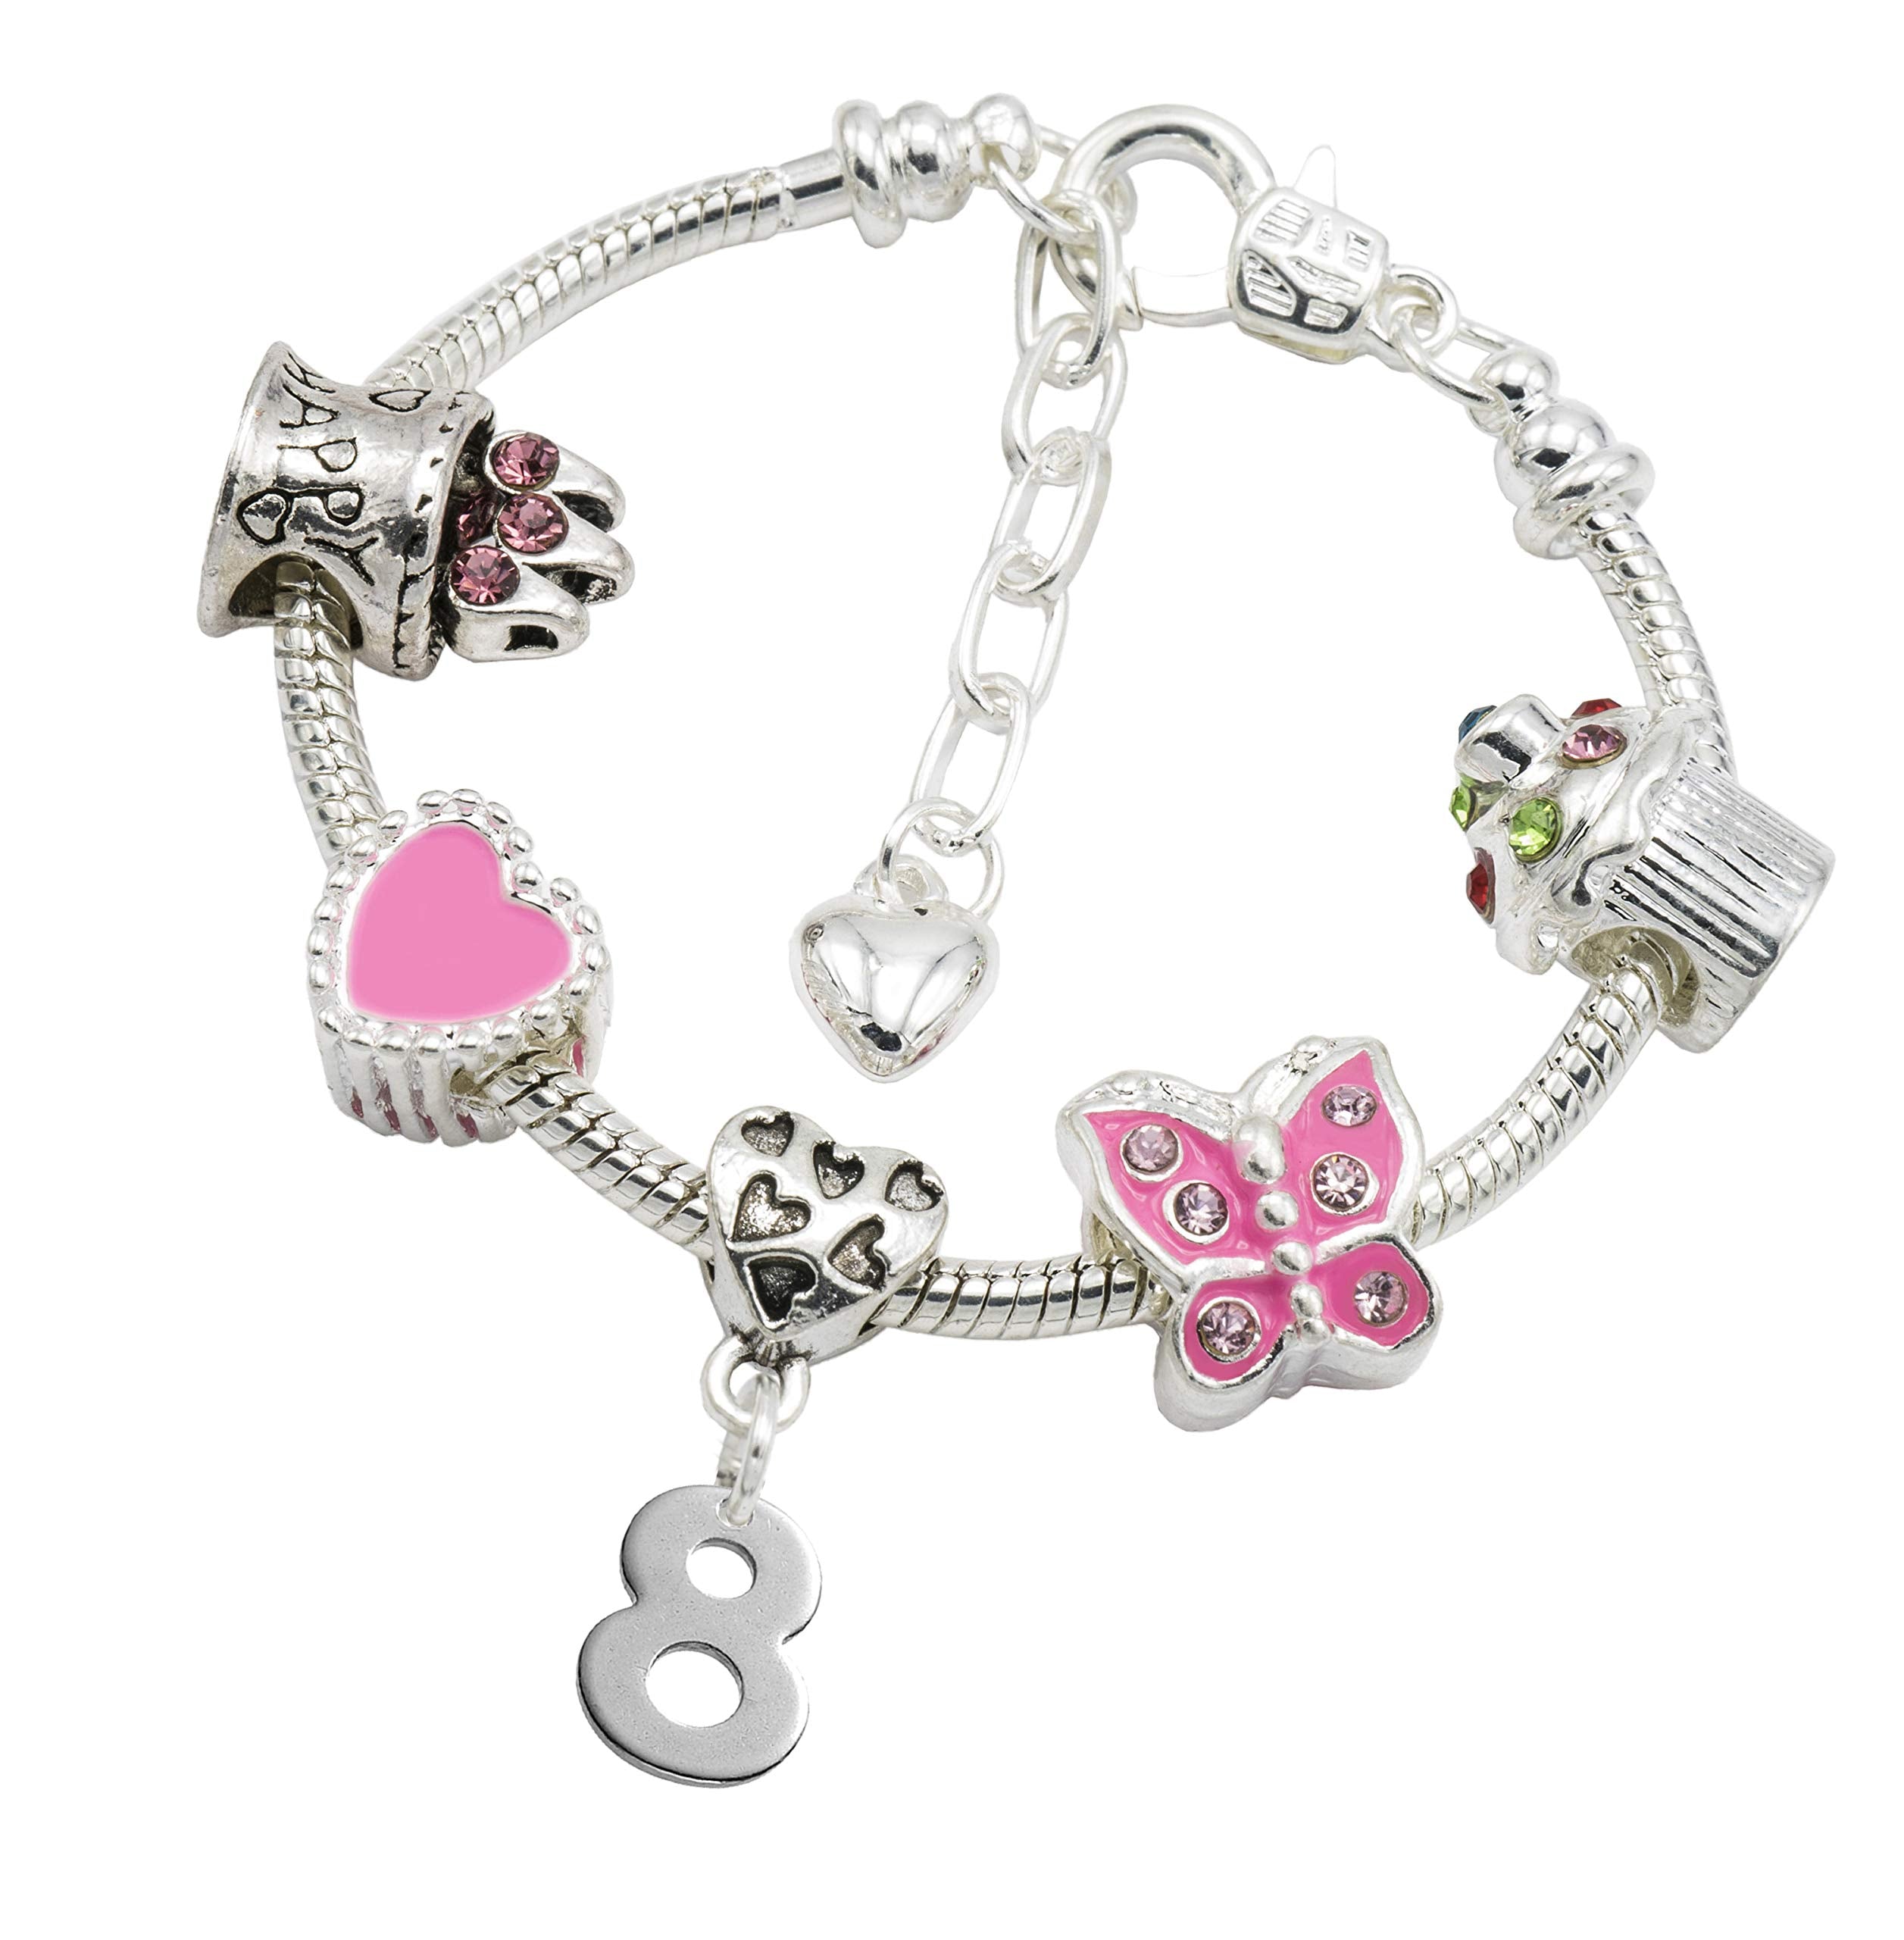 Jewellery Hut Girl's Silver Plated Birthday Charm Bracelet with Gift Box - Ages 1-11 Available